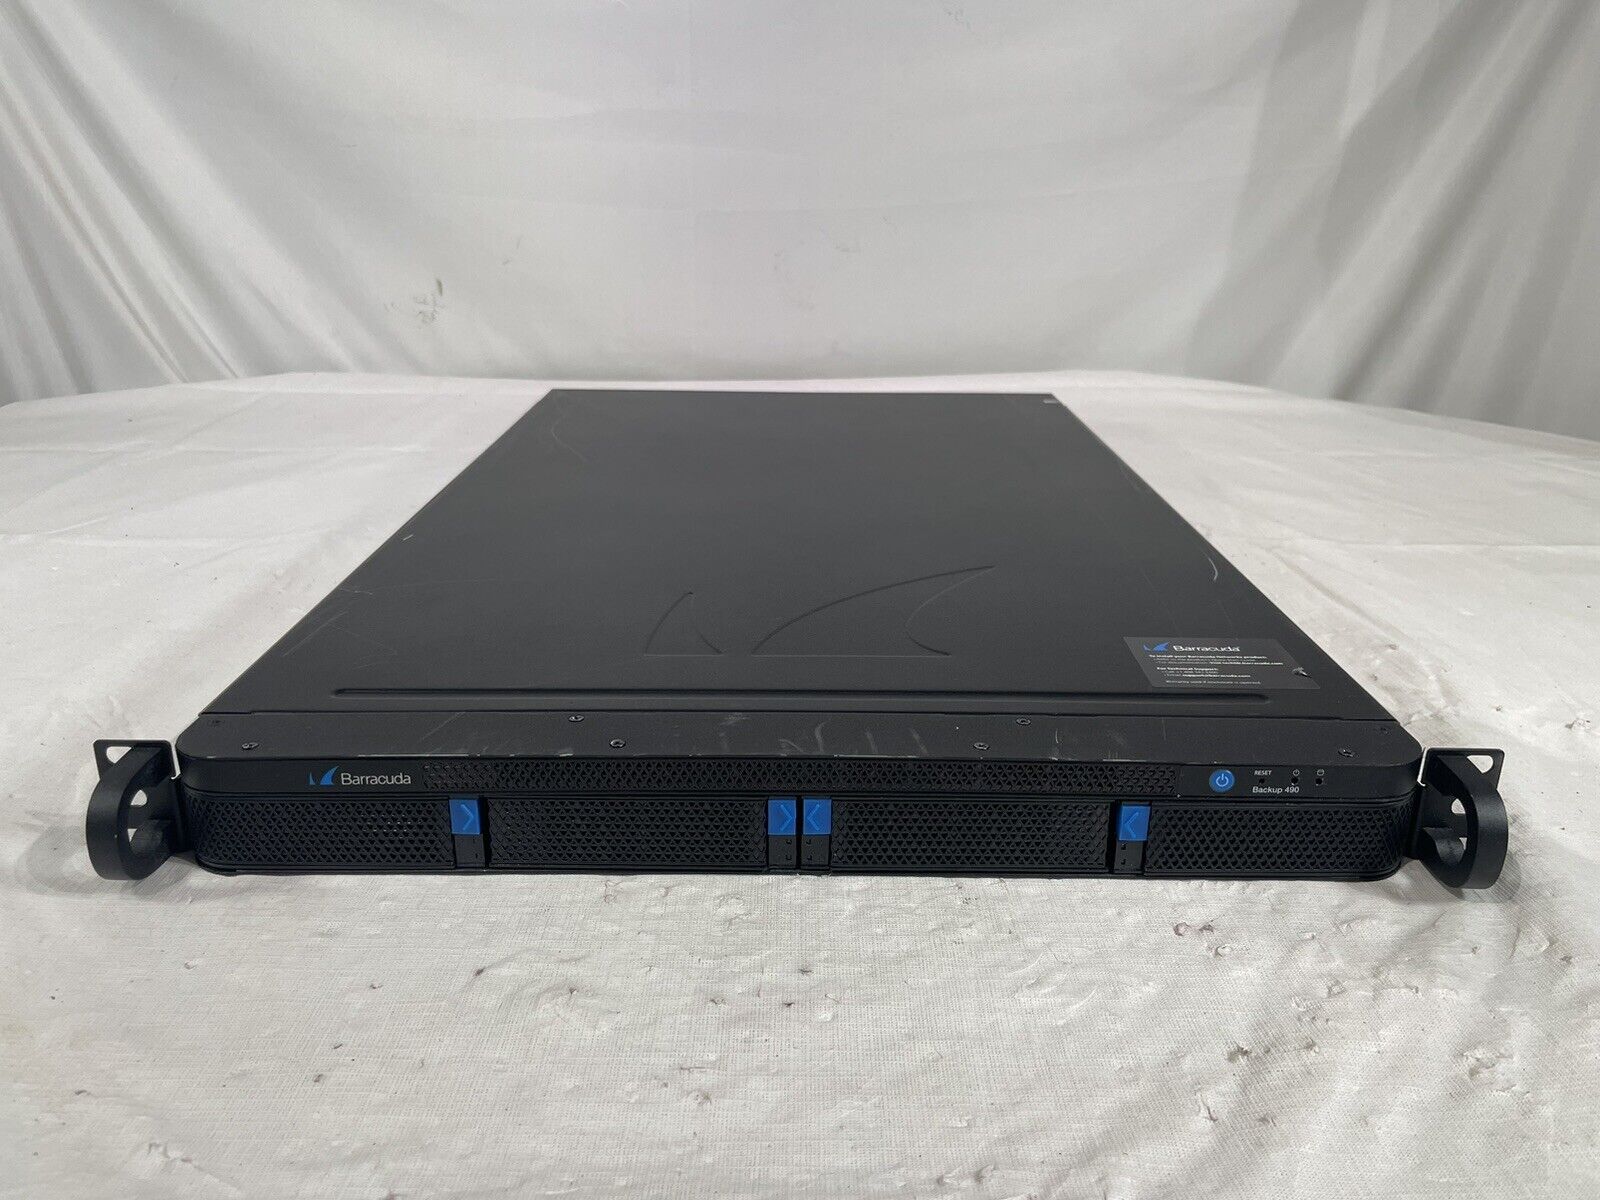 Barracuda BBS490a / BNHW004 Backup Server No HDD with Power Cord